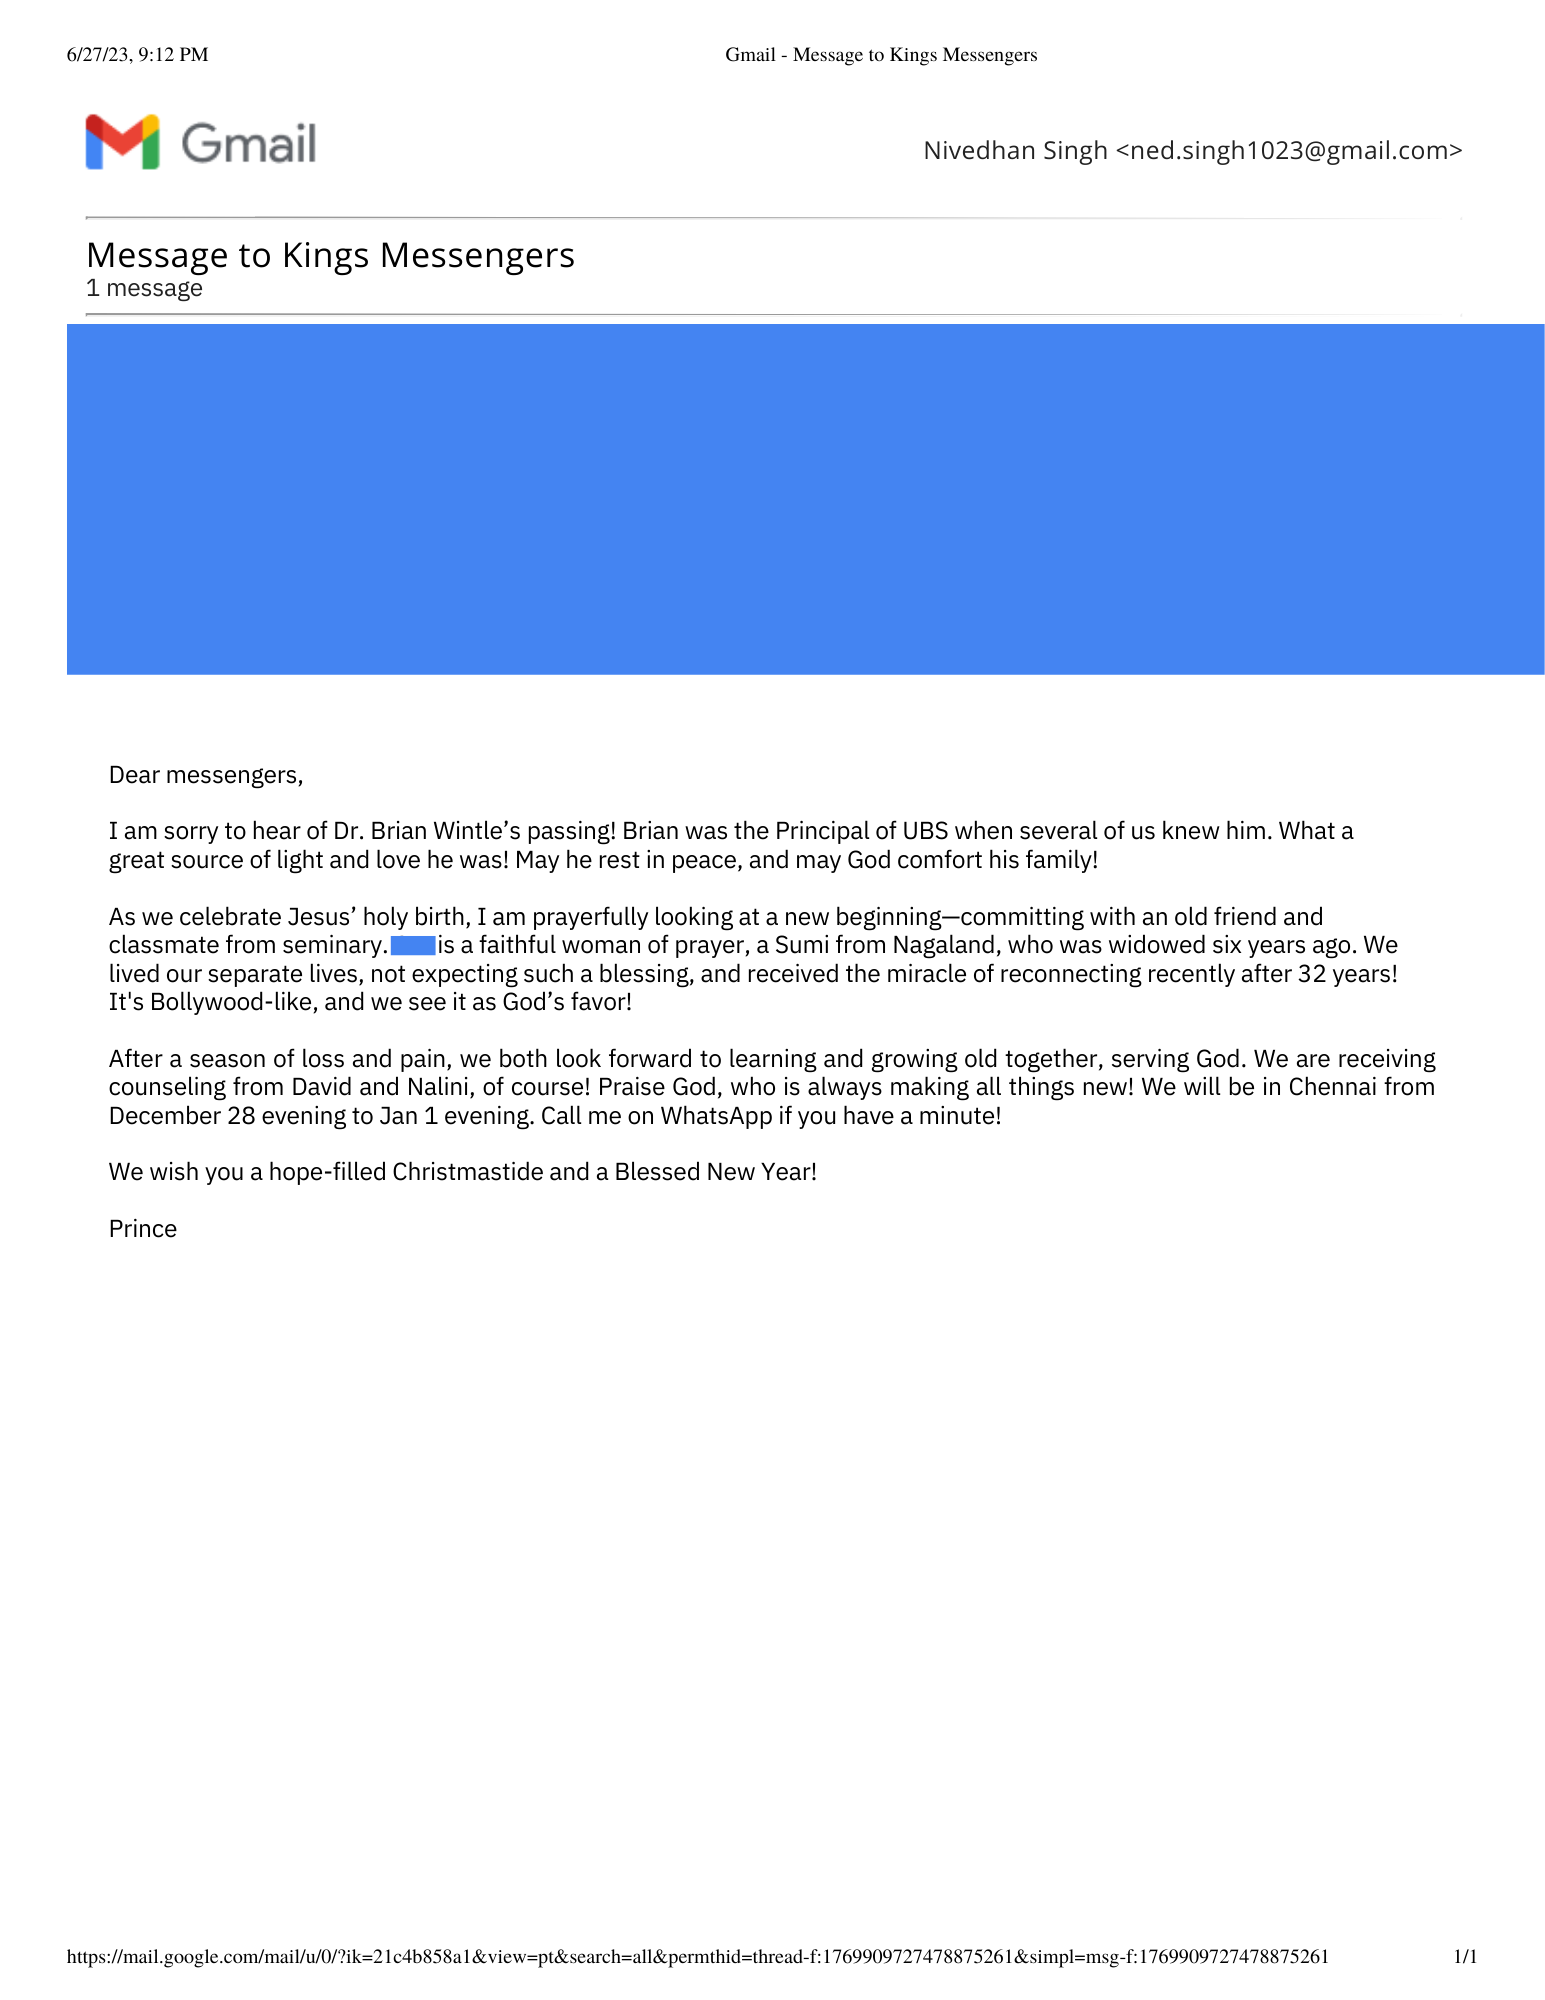 December 1st, 2022 email from Bishop Singh